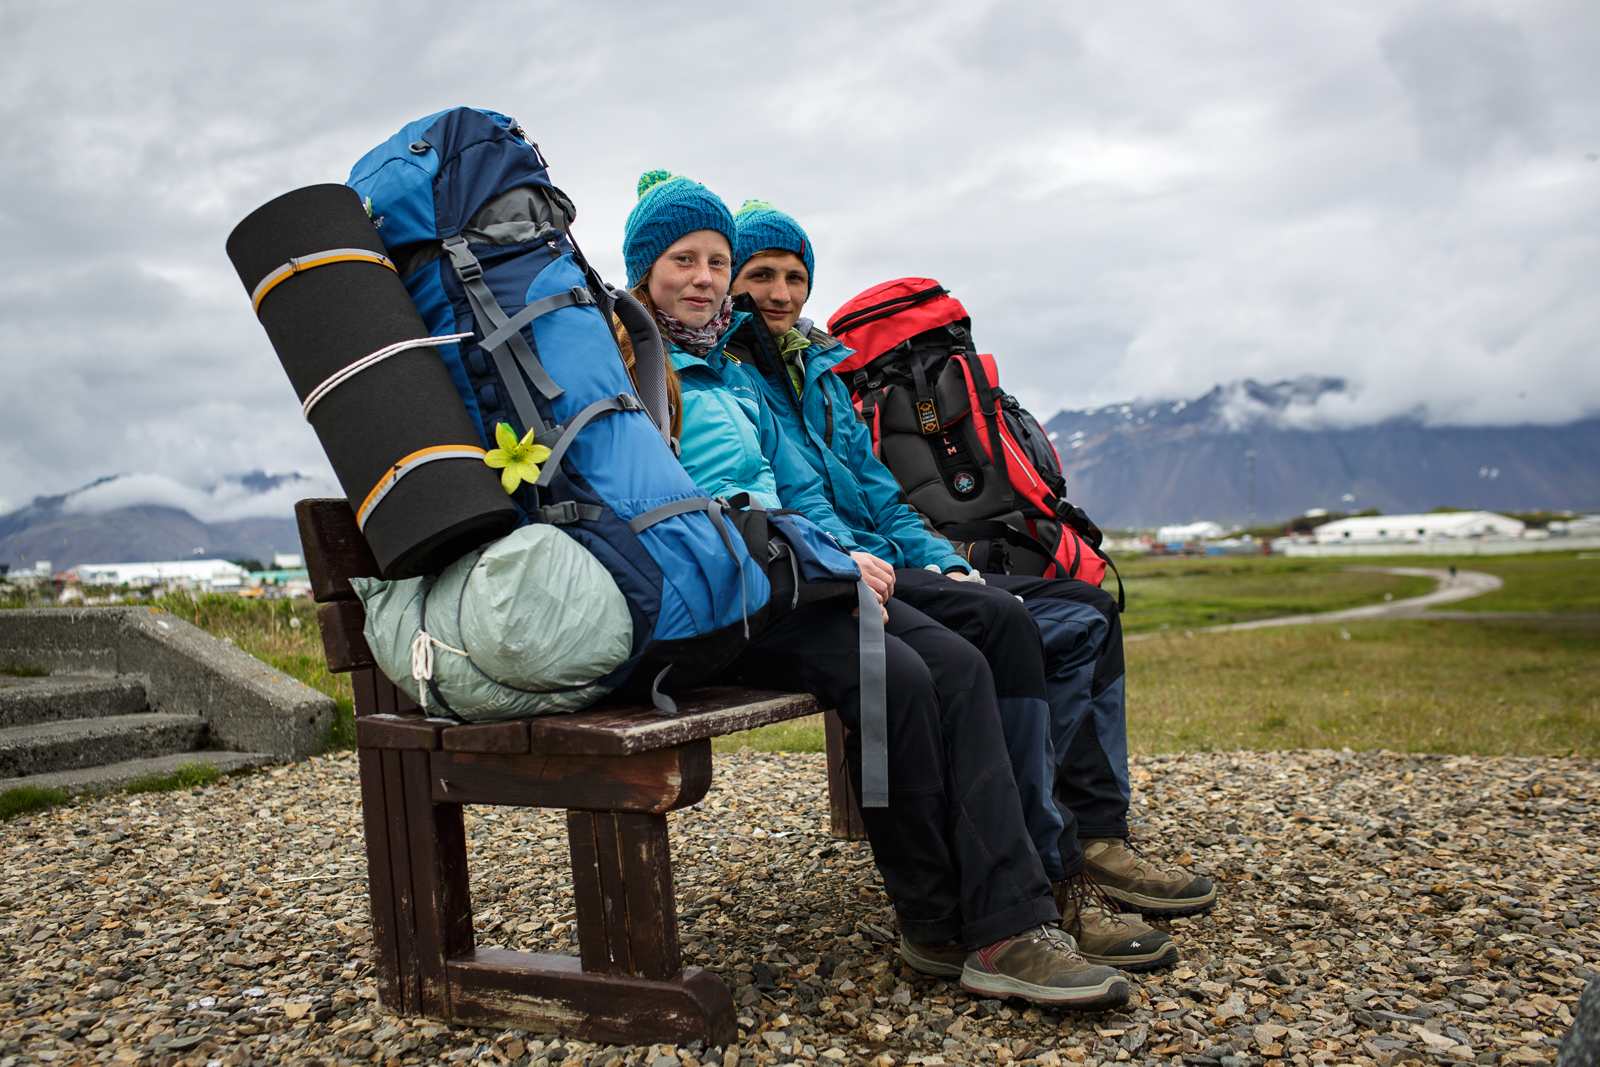  Two Polish backpackers hitch hiking their way across Iceland take a break on a bench in Hofn in southeastern Iceland. 